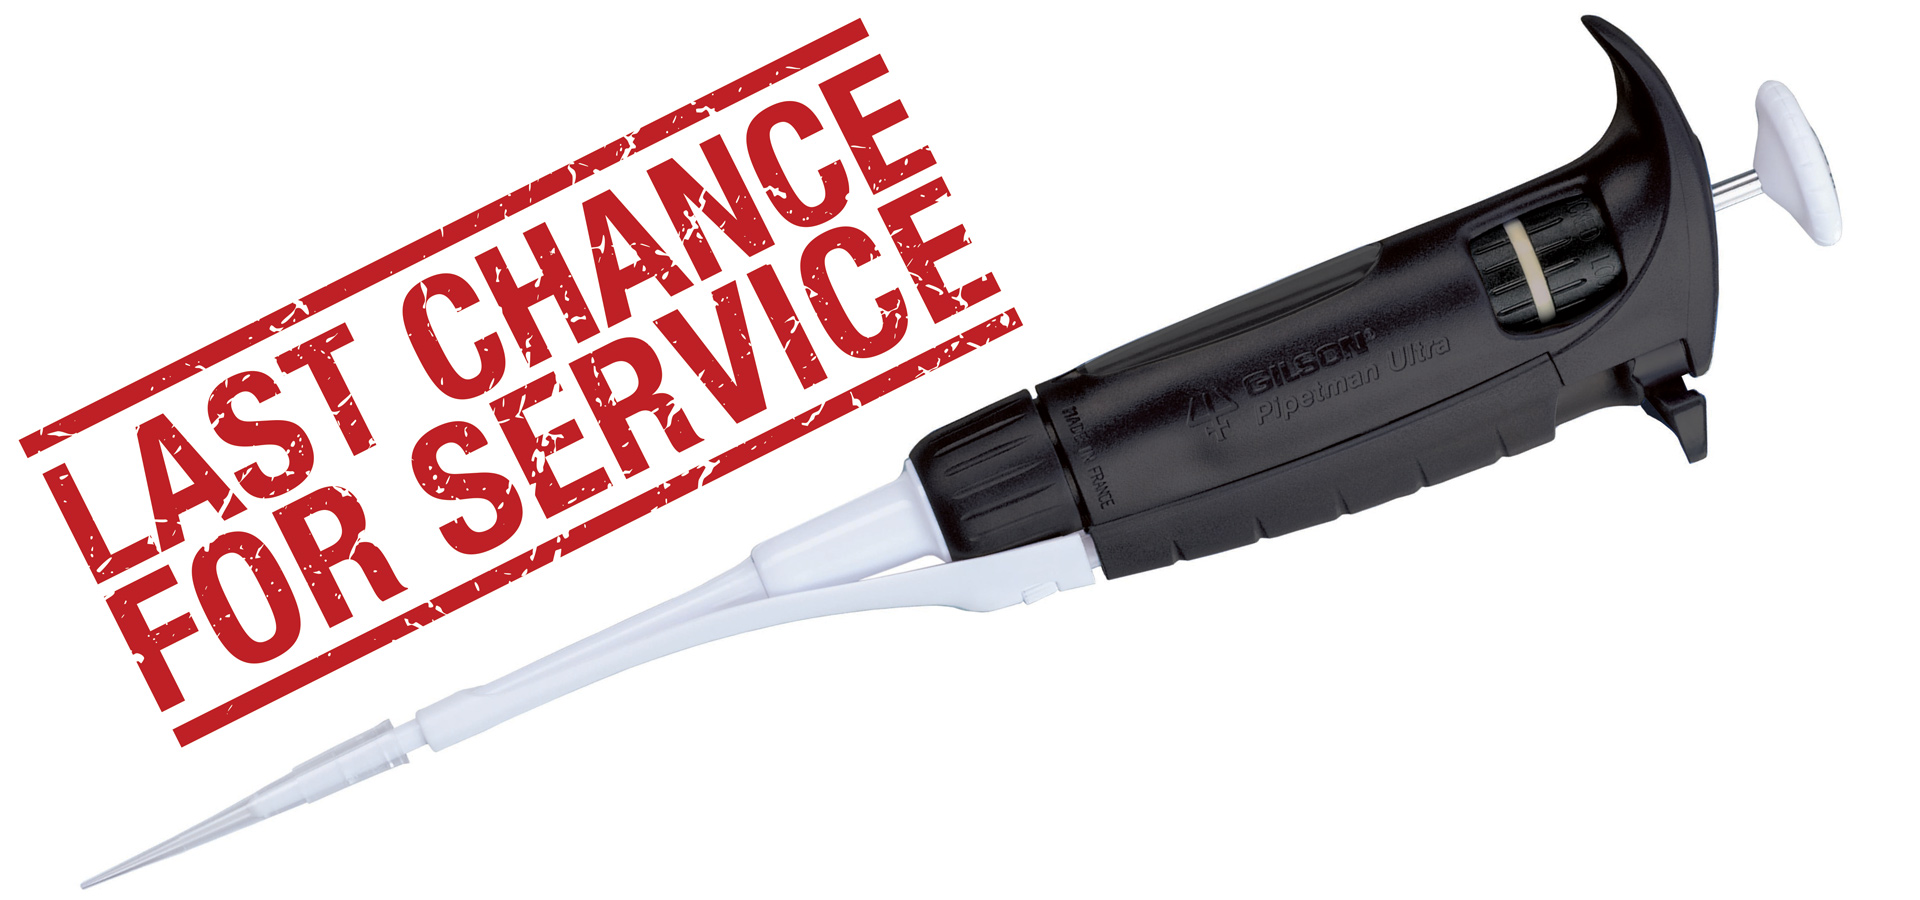 Last Chance to Service Your Gilson PIPETMAN ULTRA® Pipettes